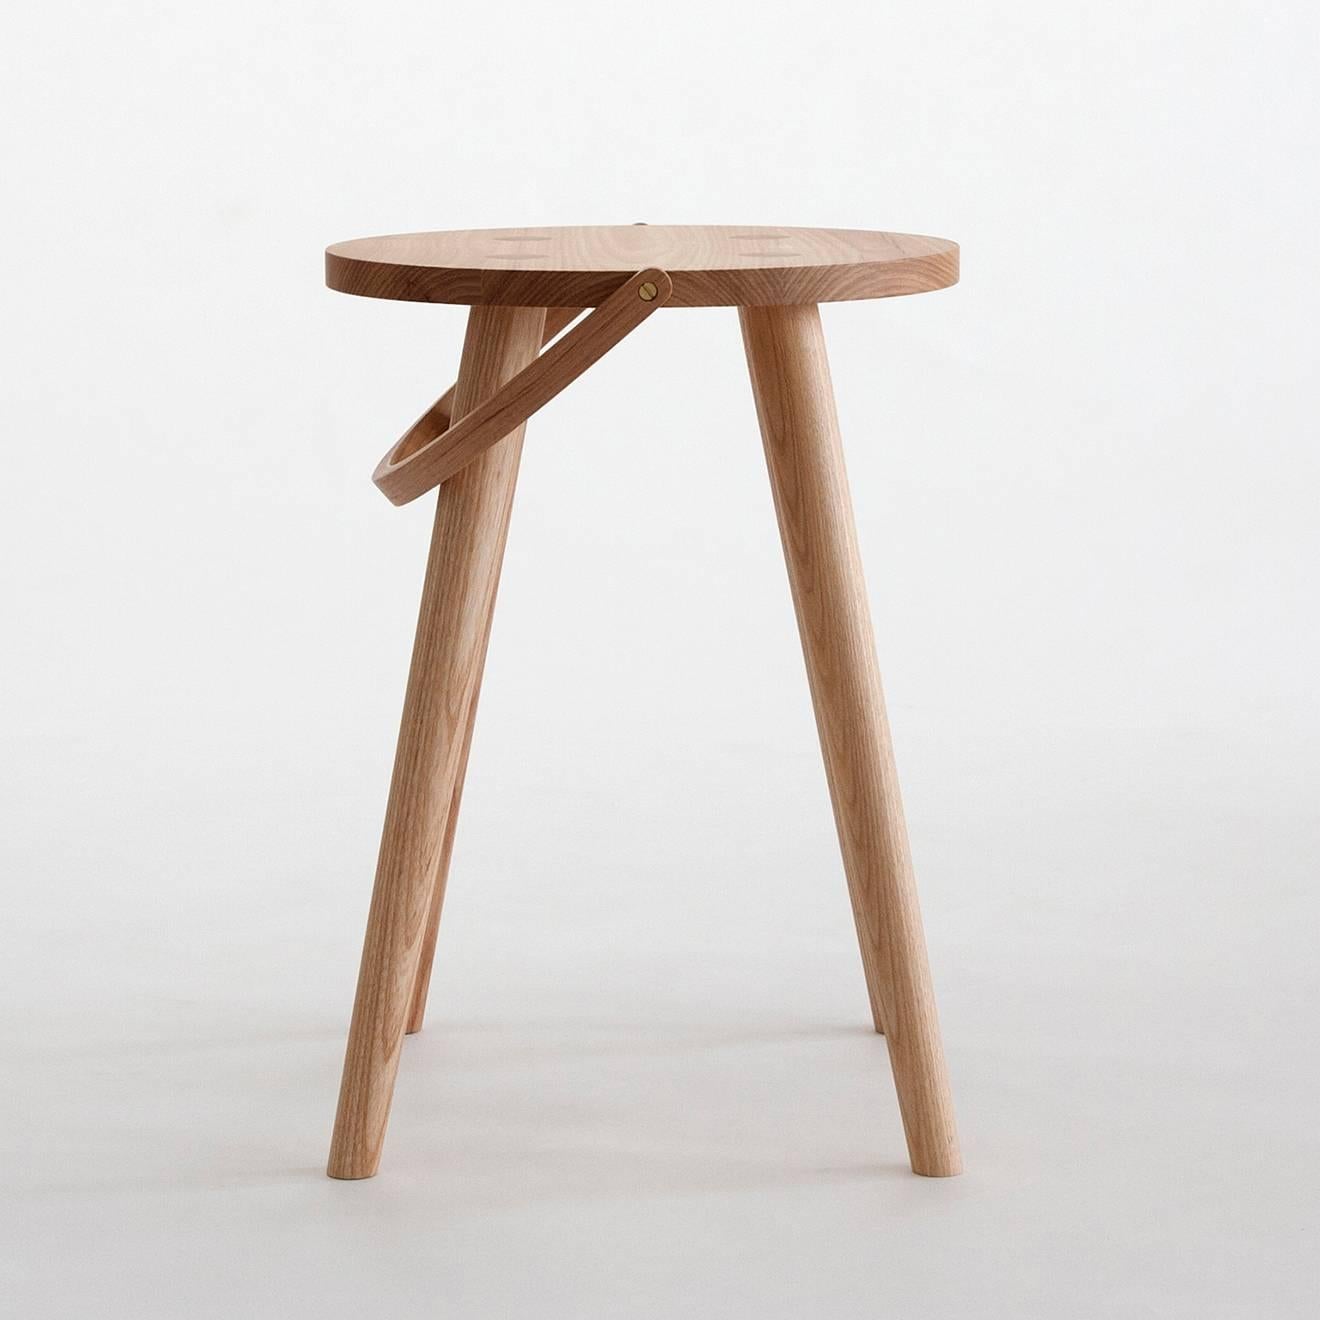 Turned Single Bucket Stool - Seat Side Table with Bentwood Handle in Solid Ash